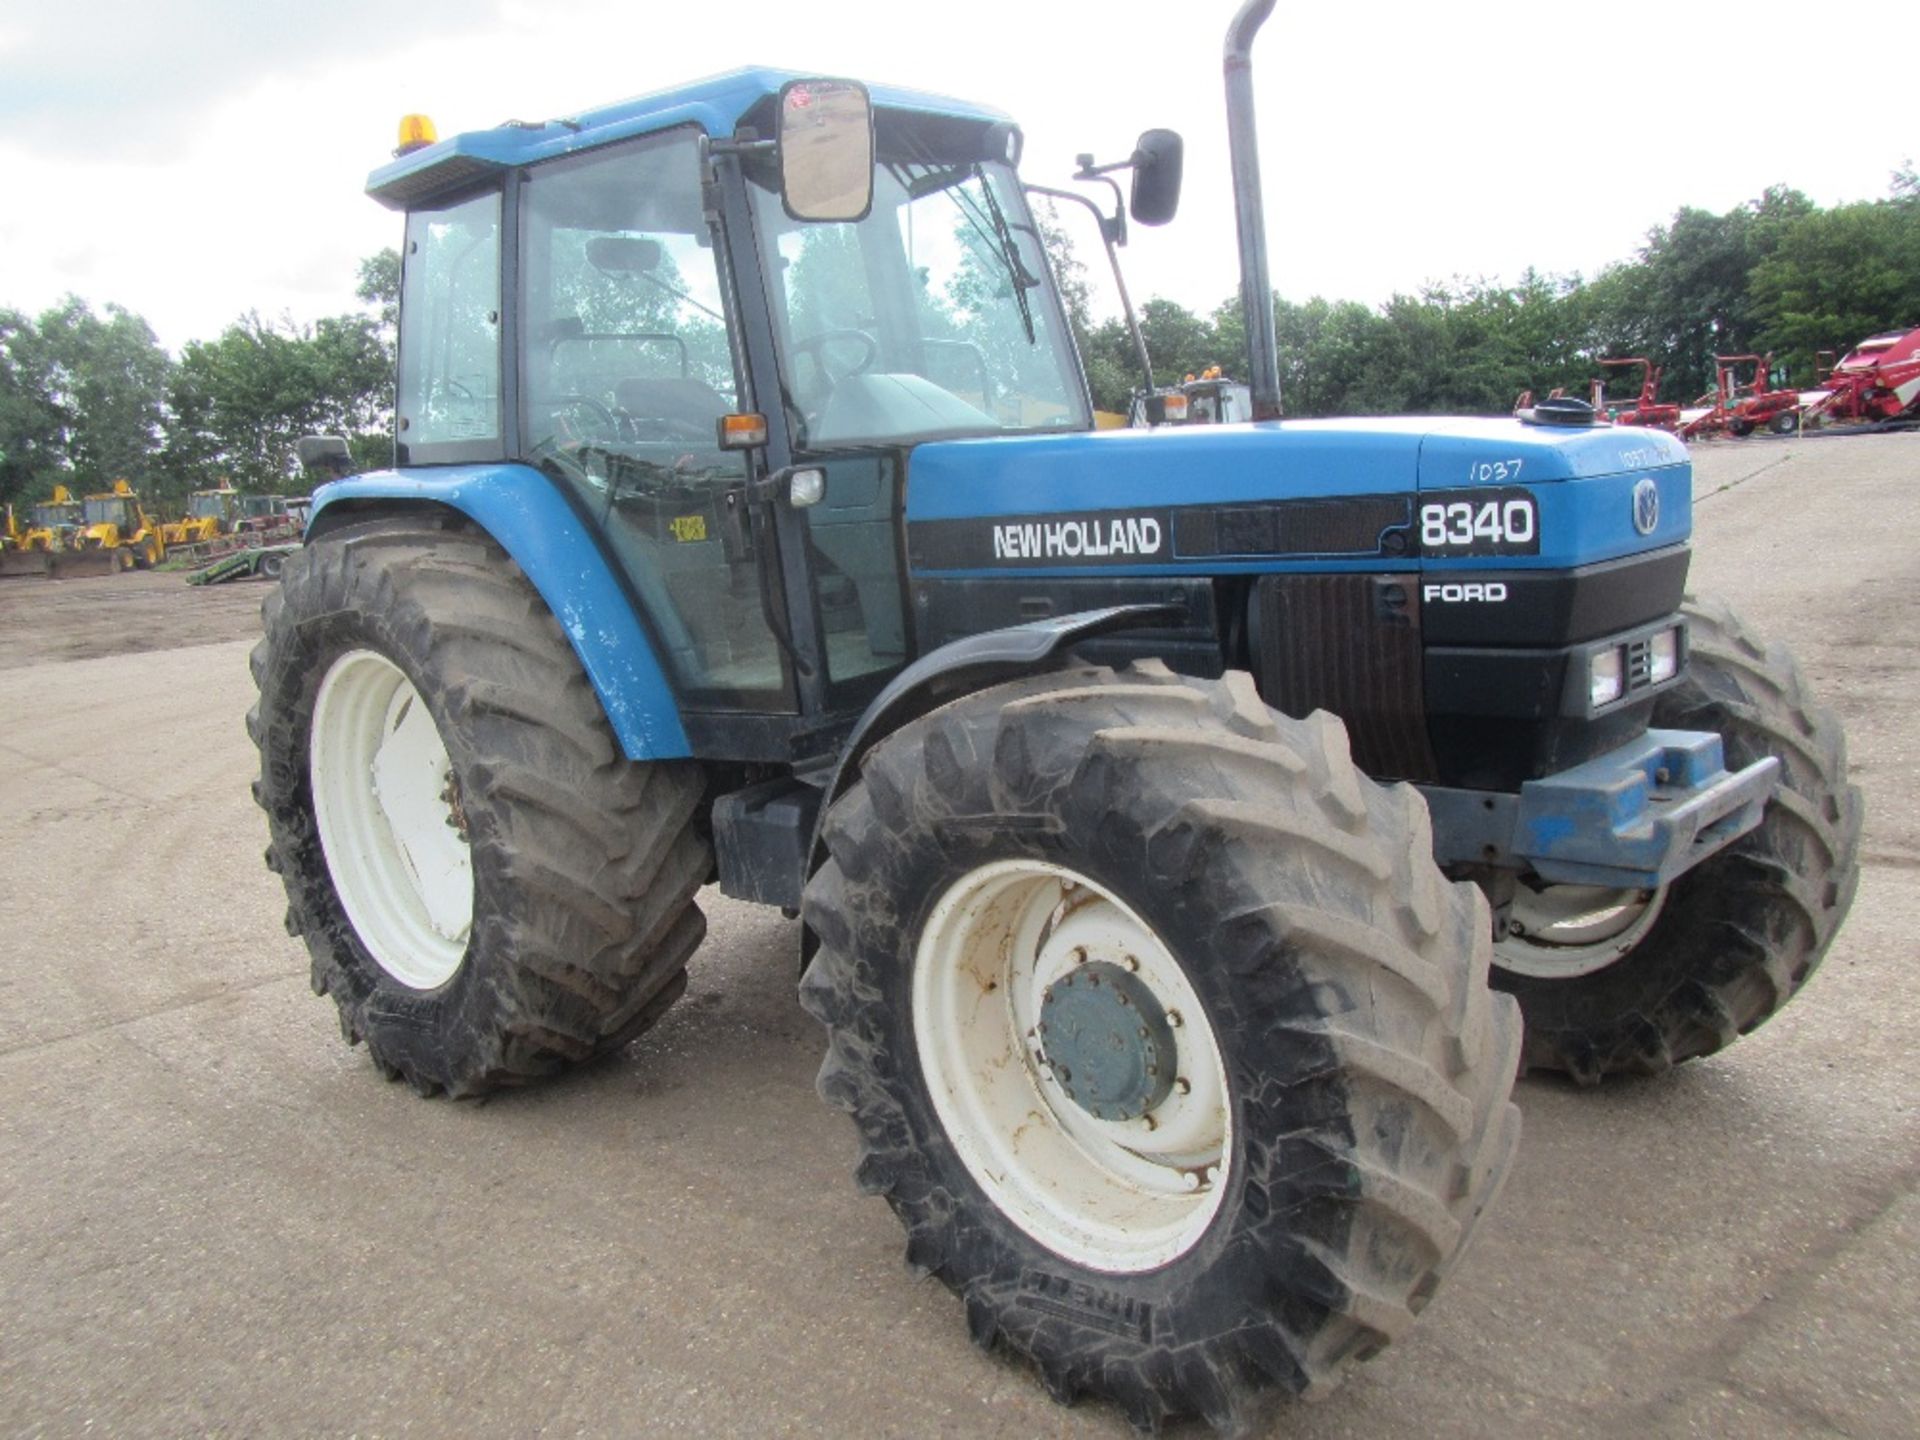 New Holland 8340 SLE 4wd Tractor. V5 will be supplied Reg. No. N243 SCN Ser. No. 025324B - Image 3 of 18